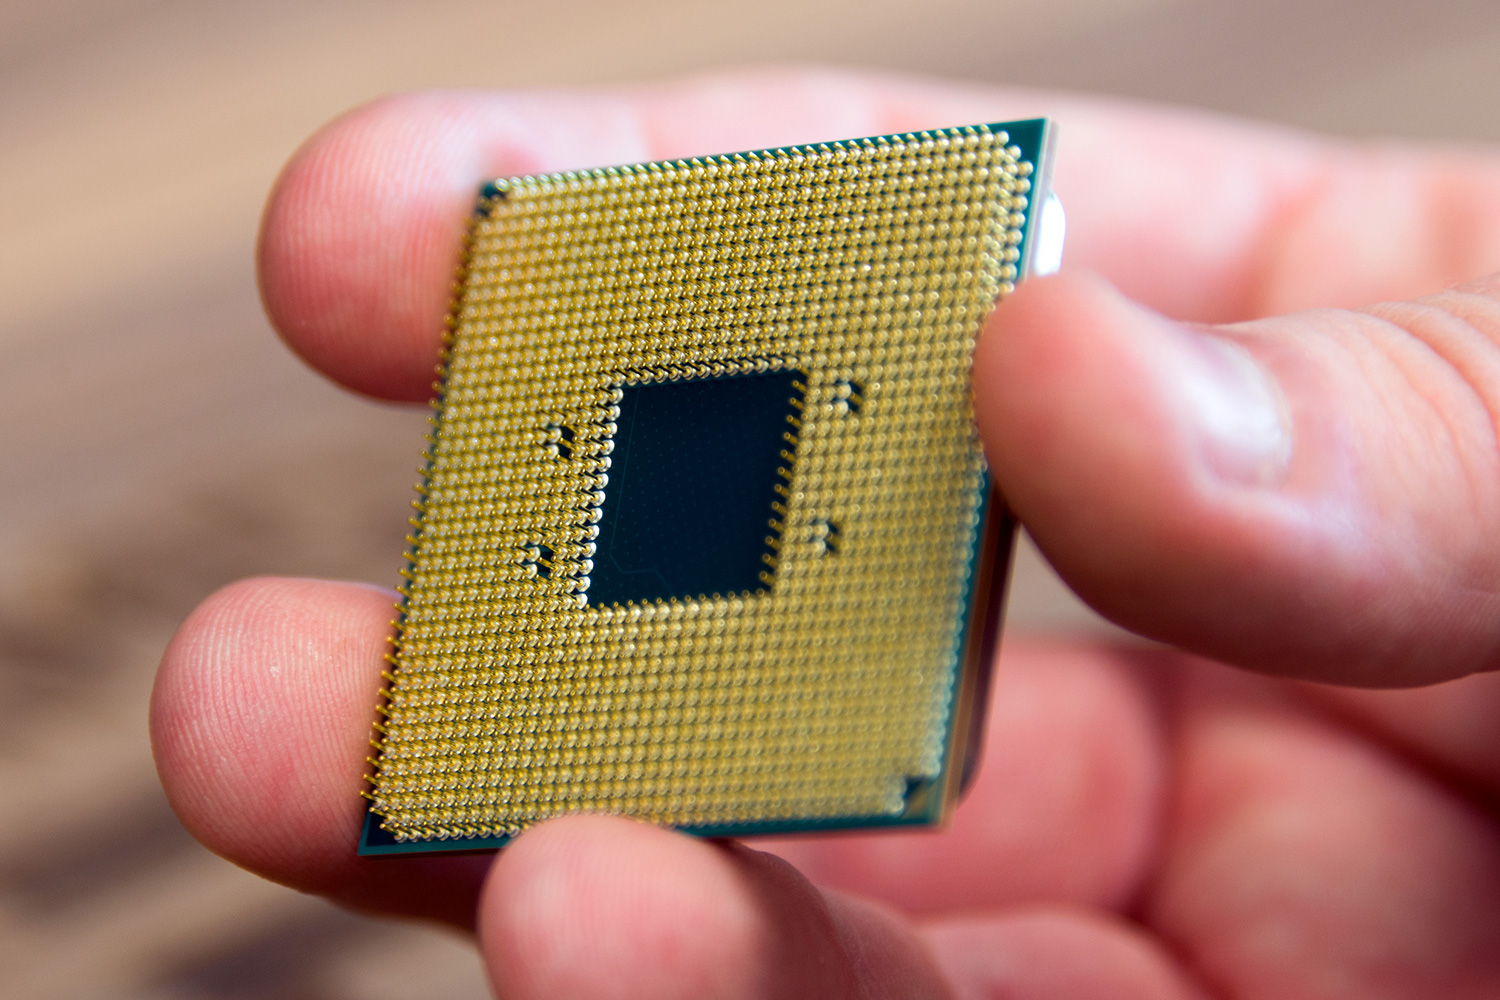 ontsmettingsmiddel verzekering Samengroeiing What Is a CPU? Here's Everything You Need to Know | Digital Trends